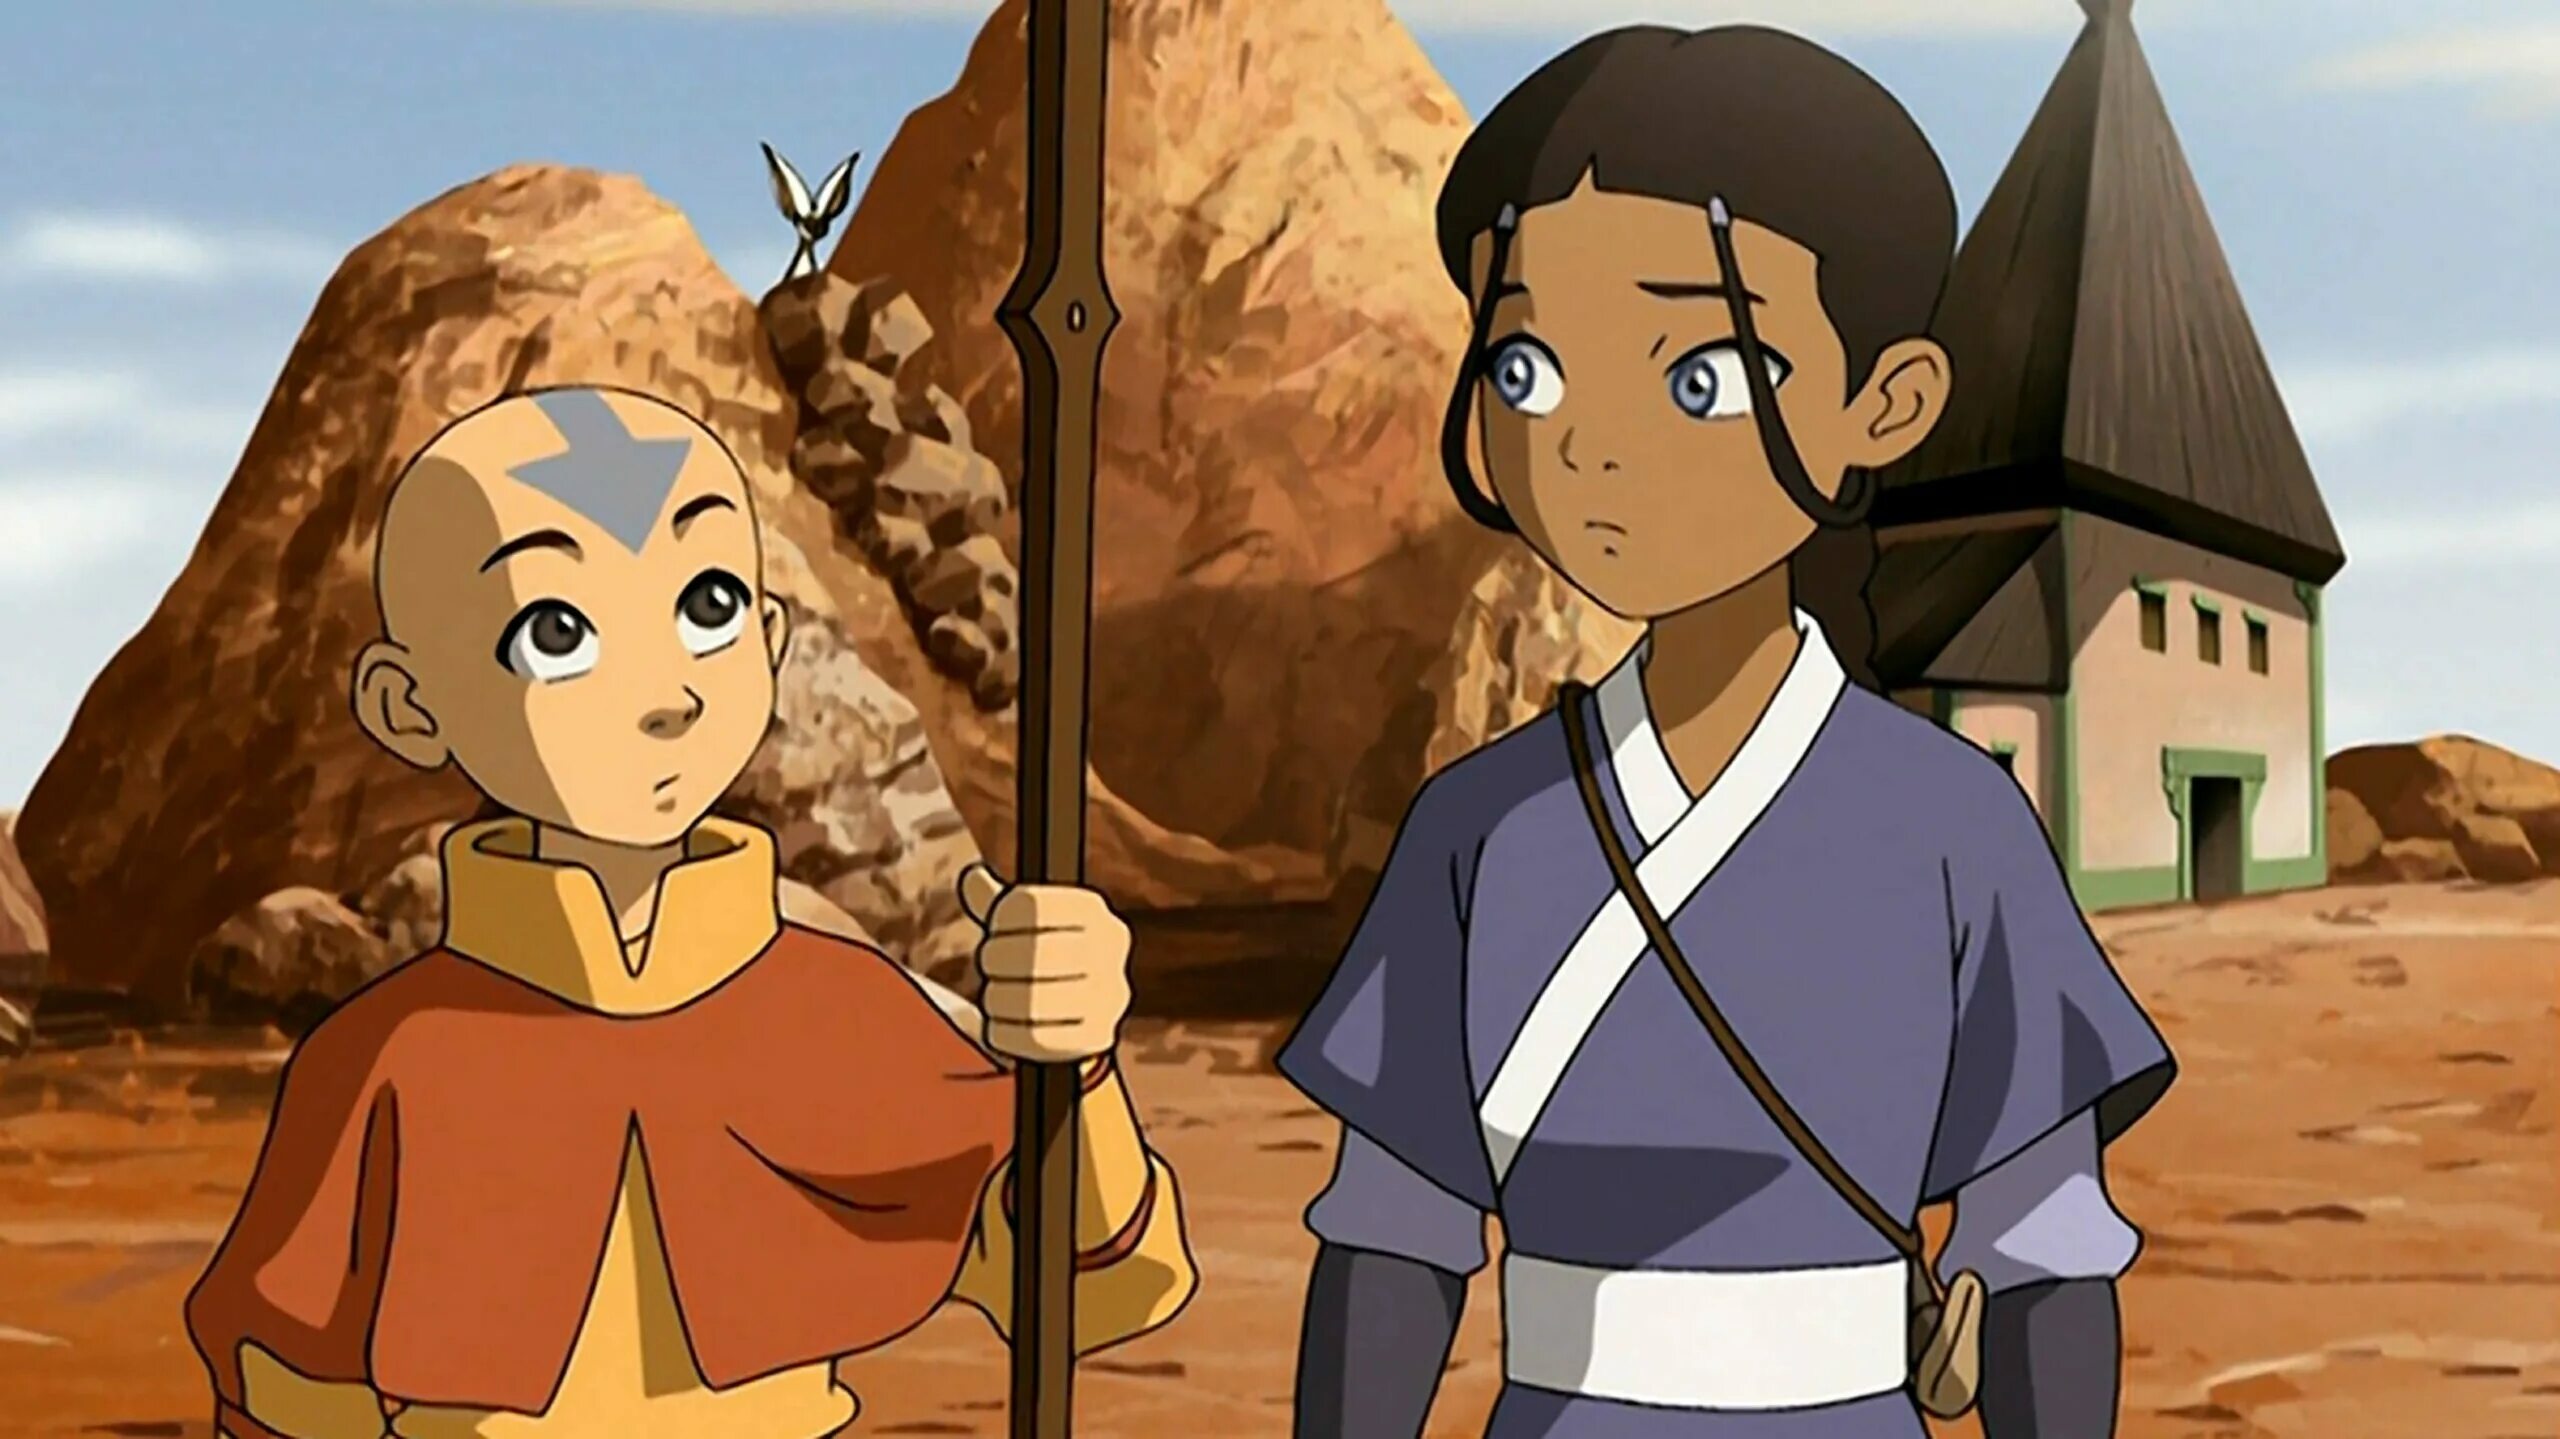 Avatar the last airbender in english. Аватар аанг. Аватар аанг Нетфликс.